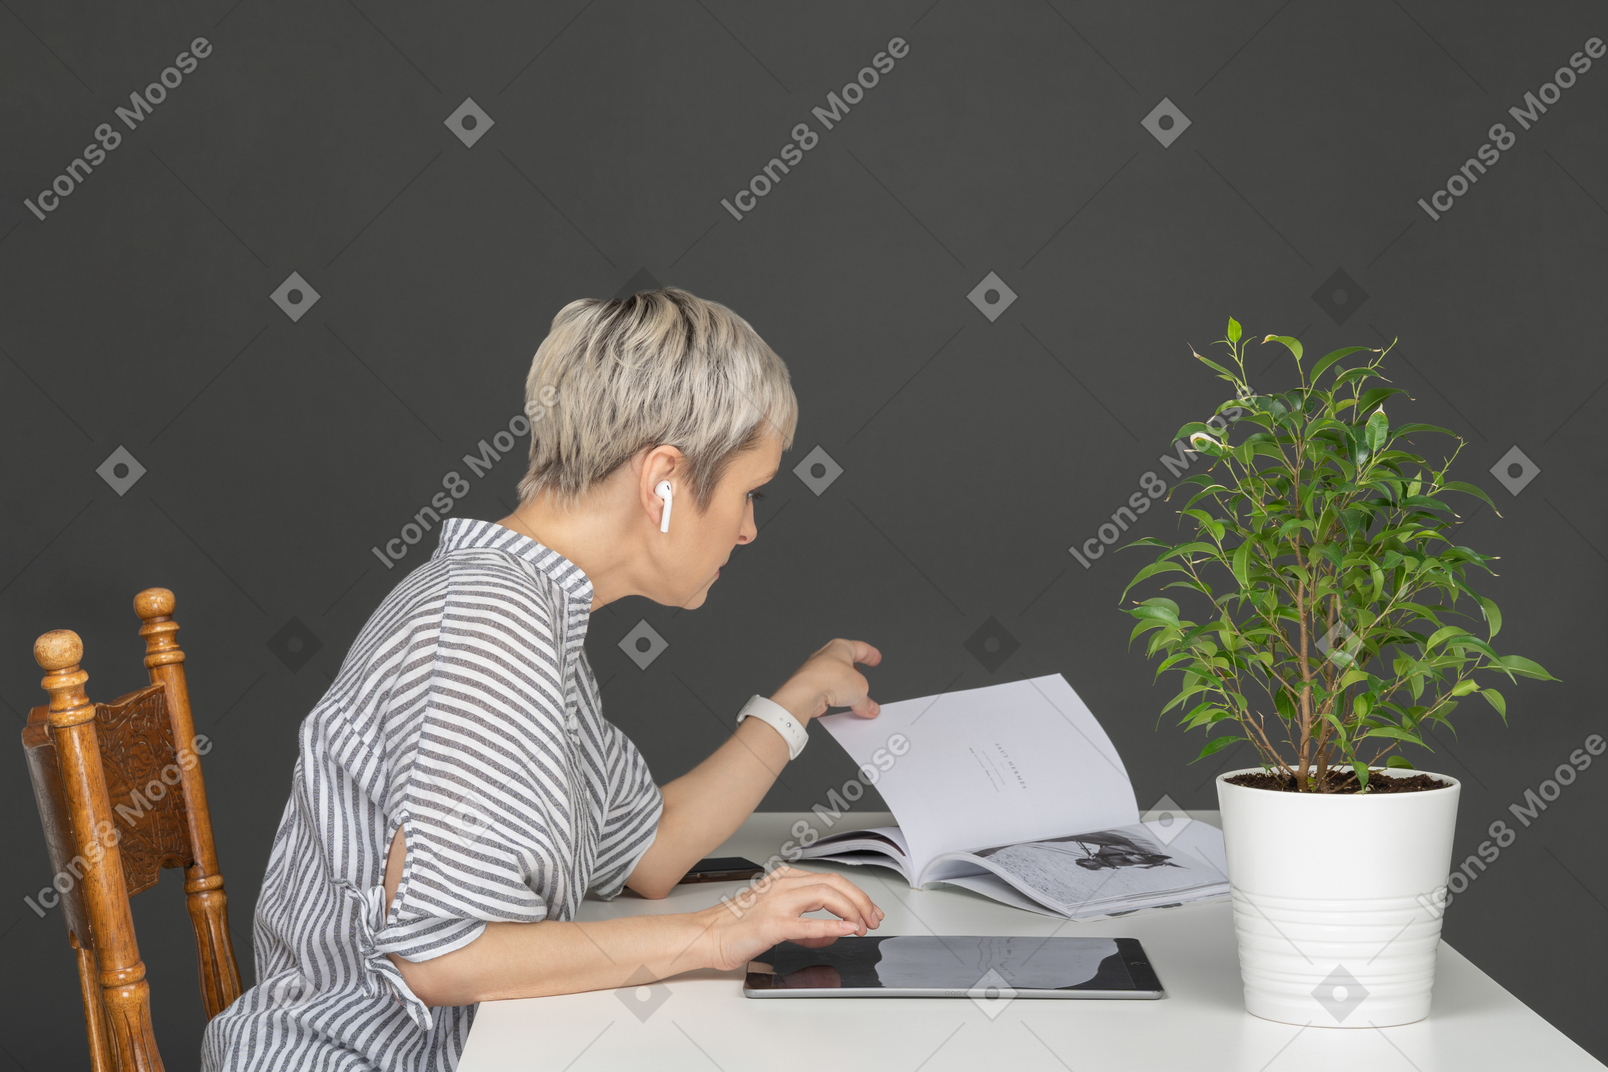 Woman at a table with earphones, magazine and tablet pc